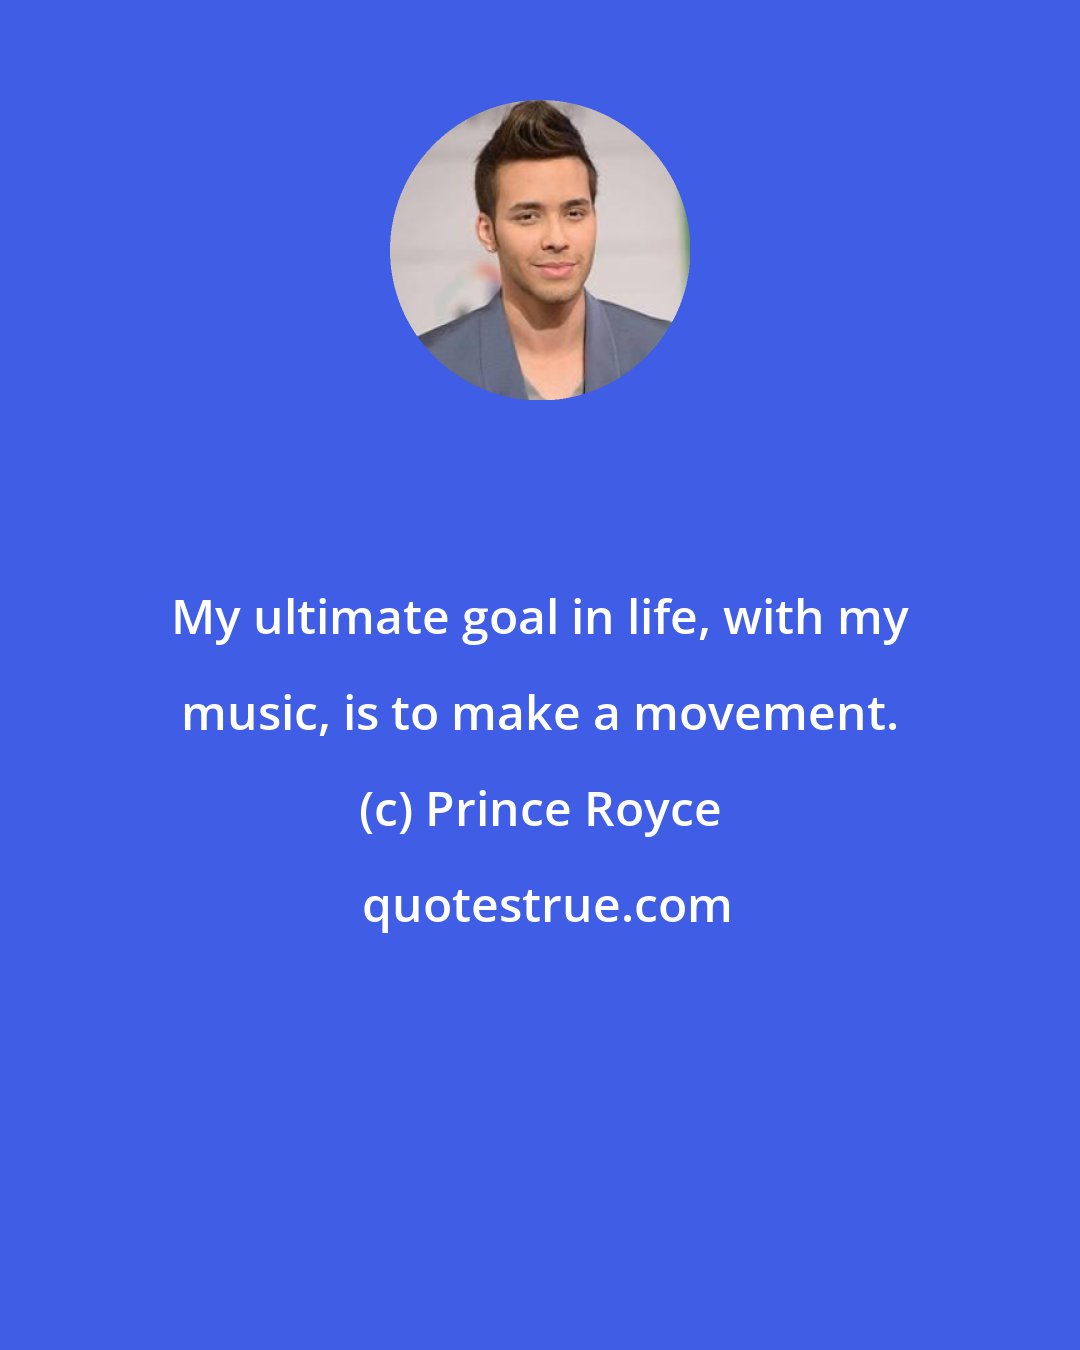 Prince Royce: My ultimate goal in life, with my music, is to make a movement.